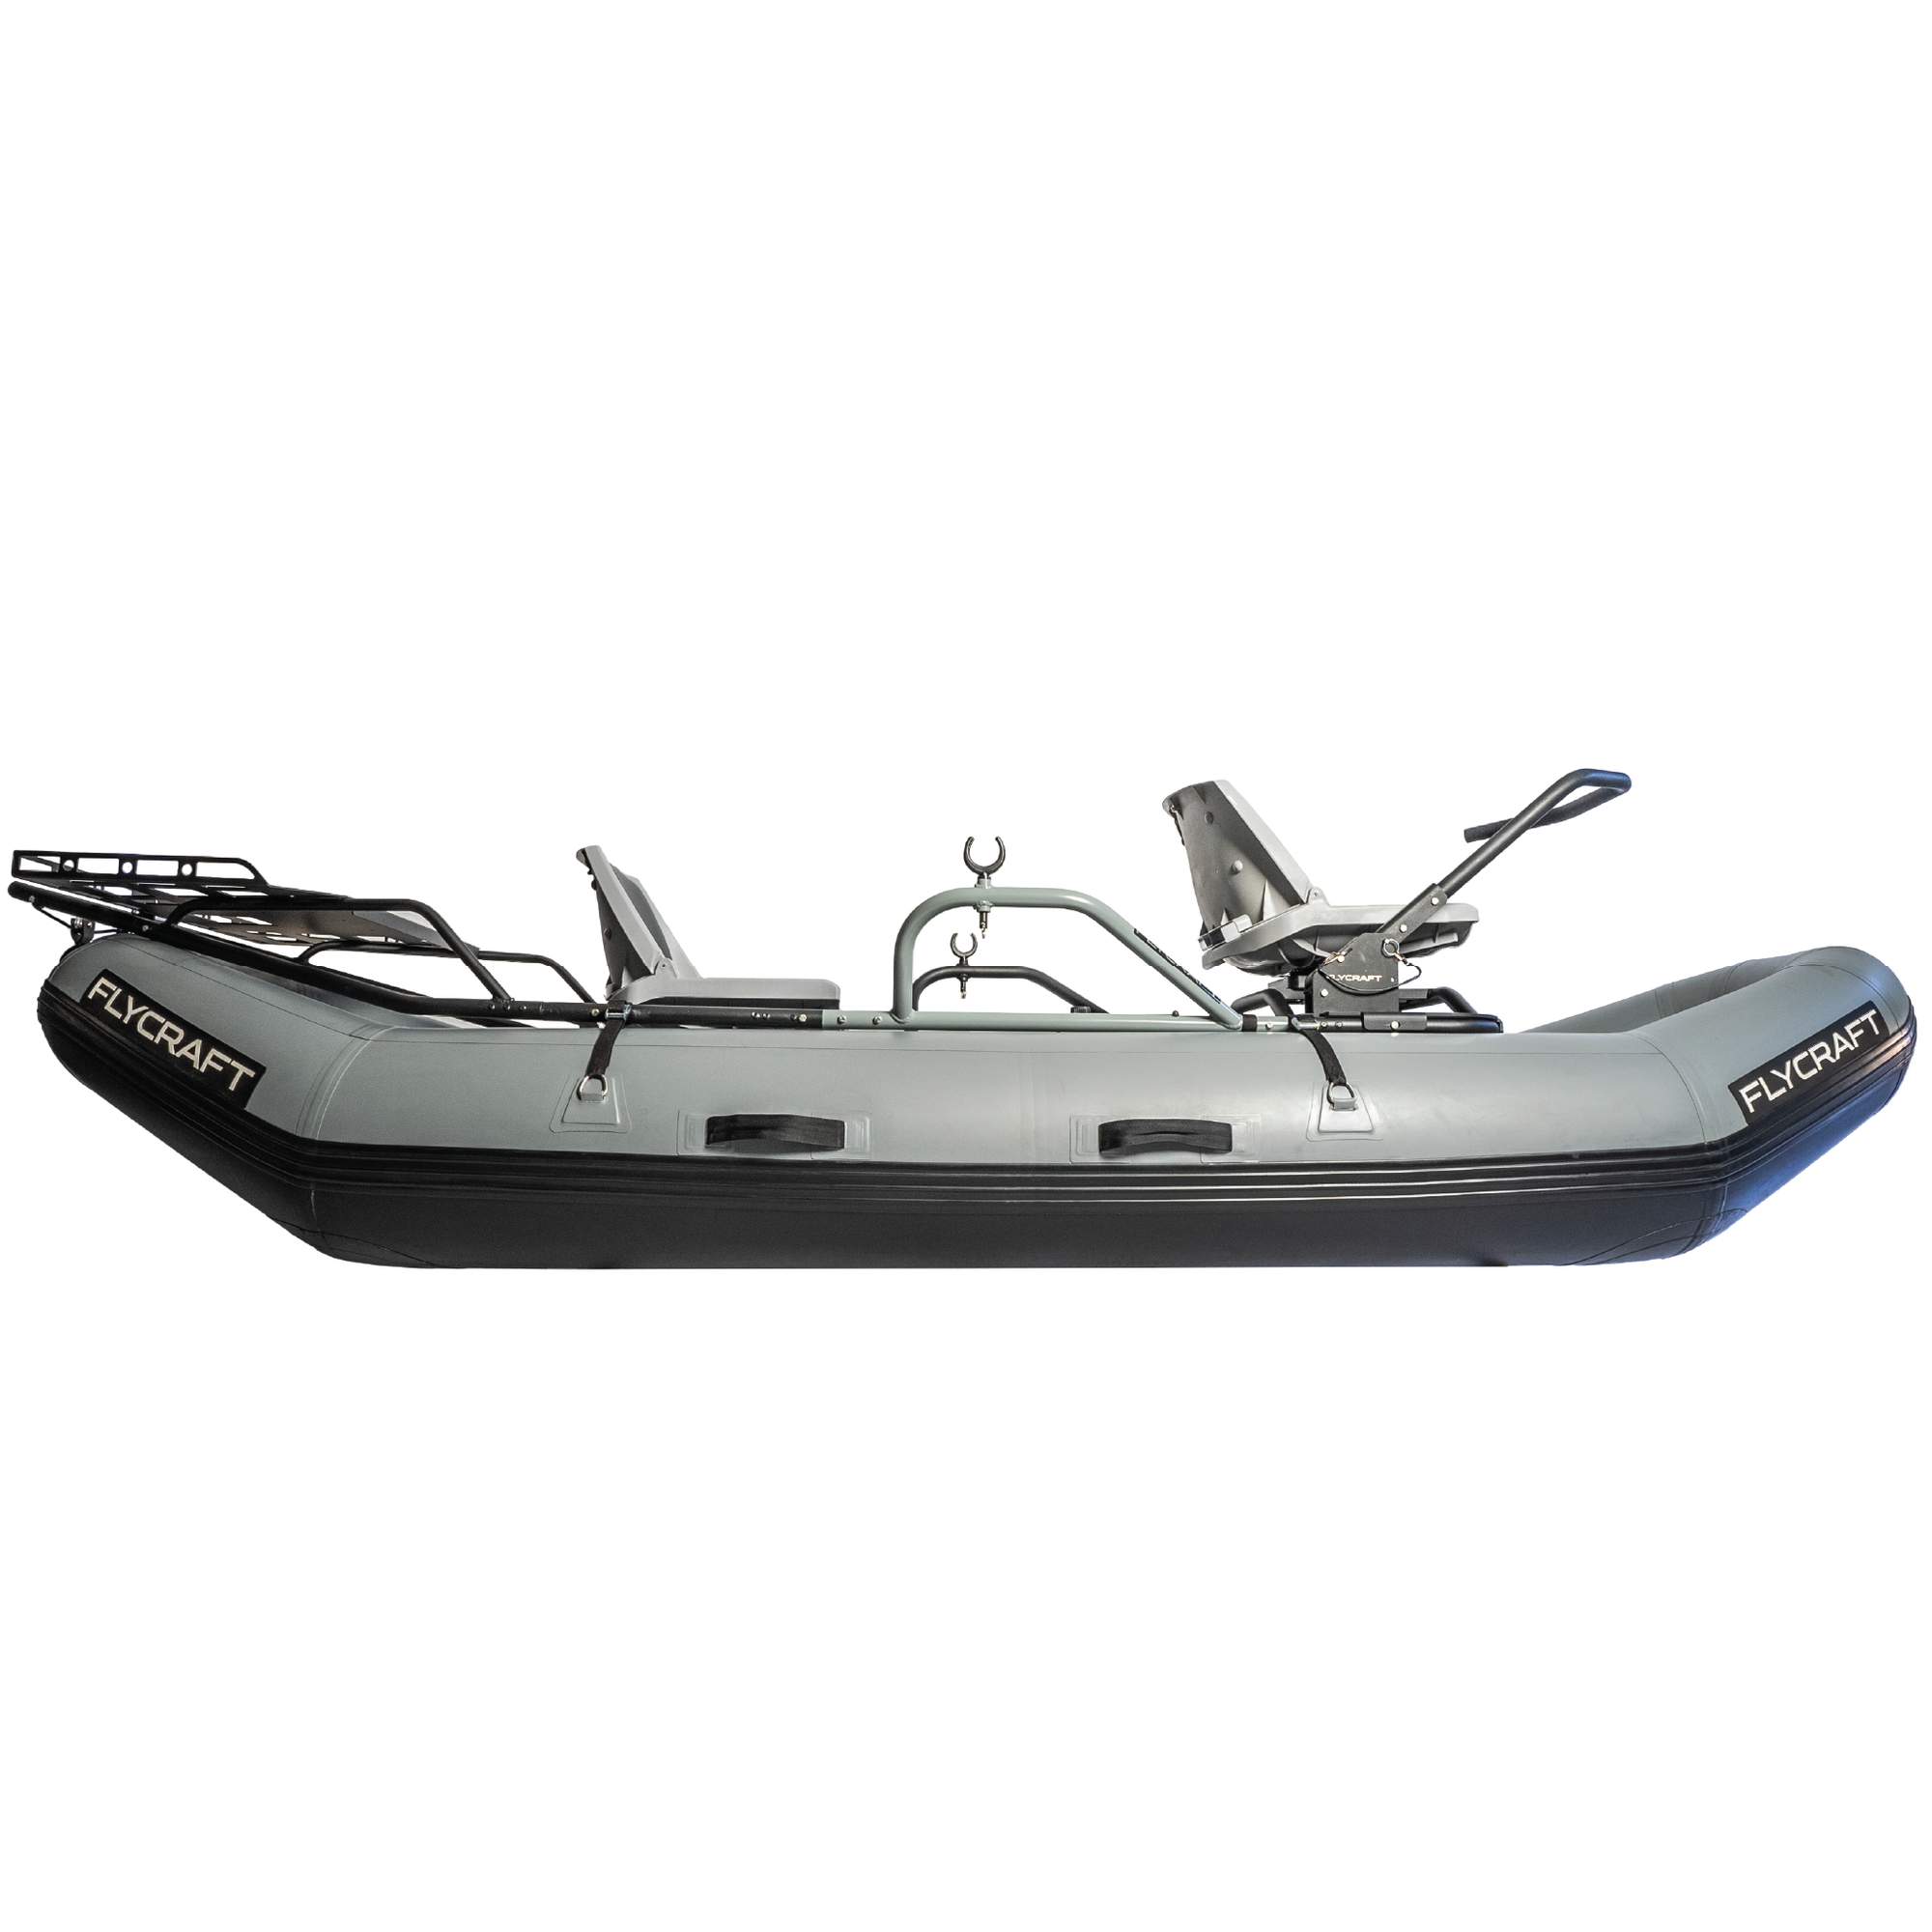 2-Person Inflatable Pontoon Boat Review